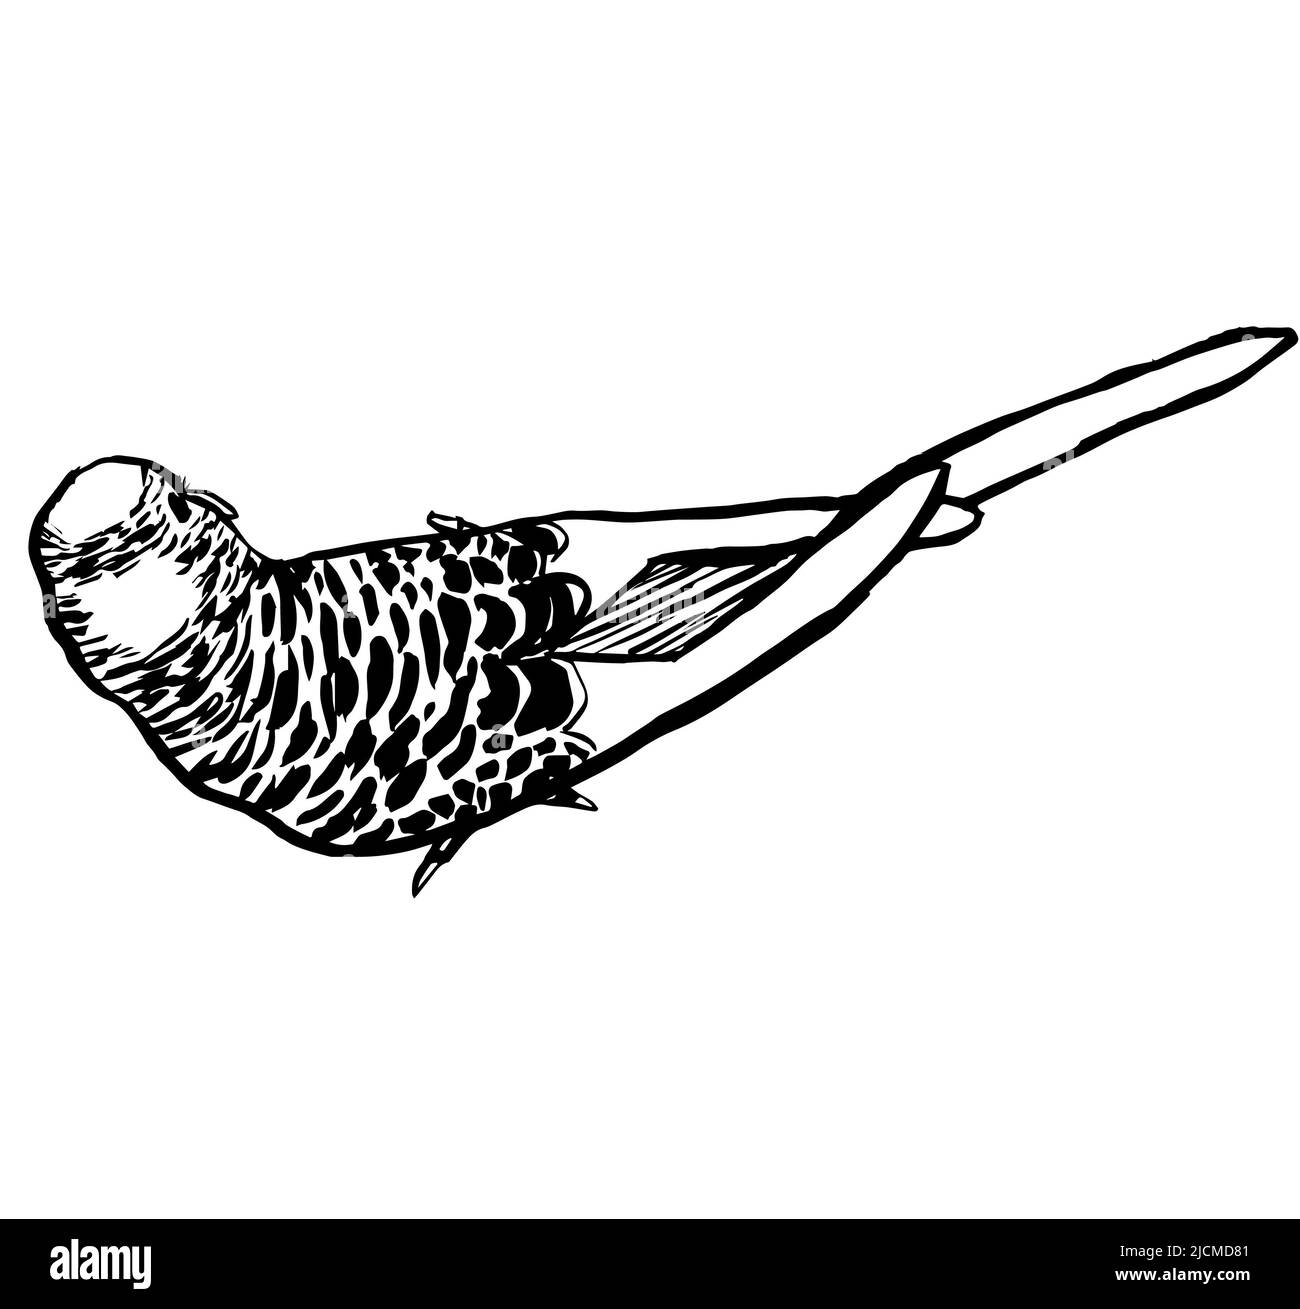 Black and white ink illustration of a a budgerigar parakeet. Stock Photo